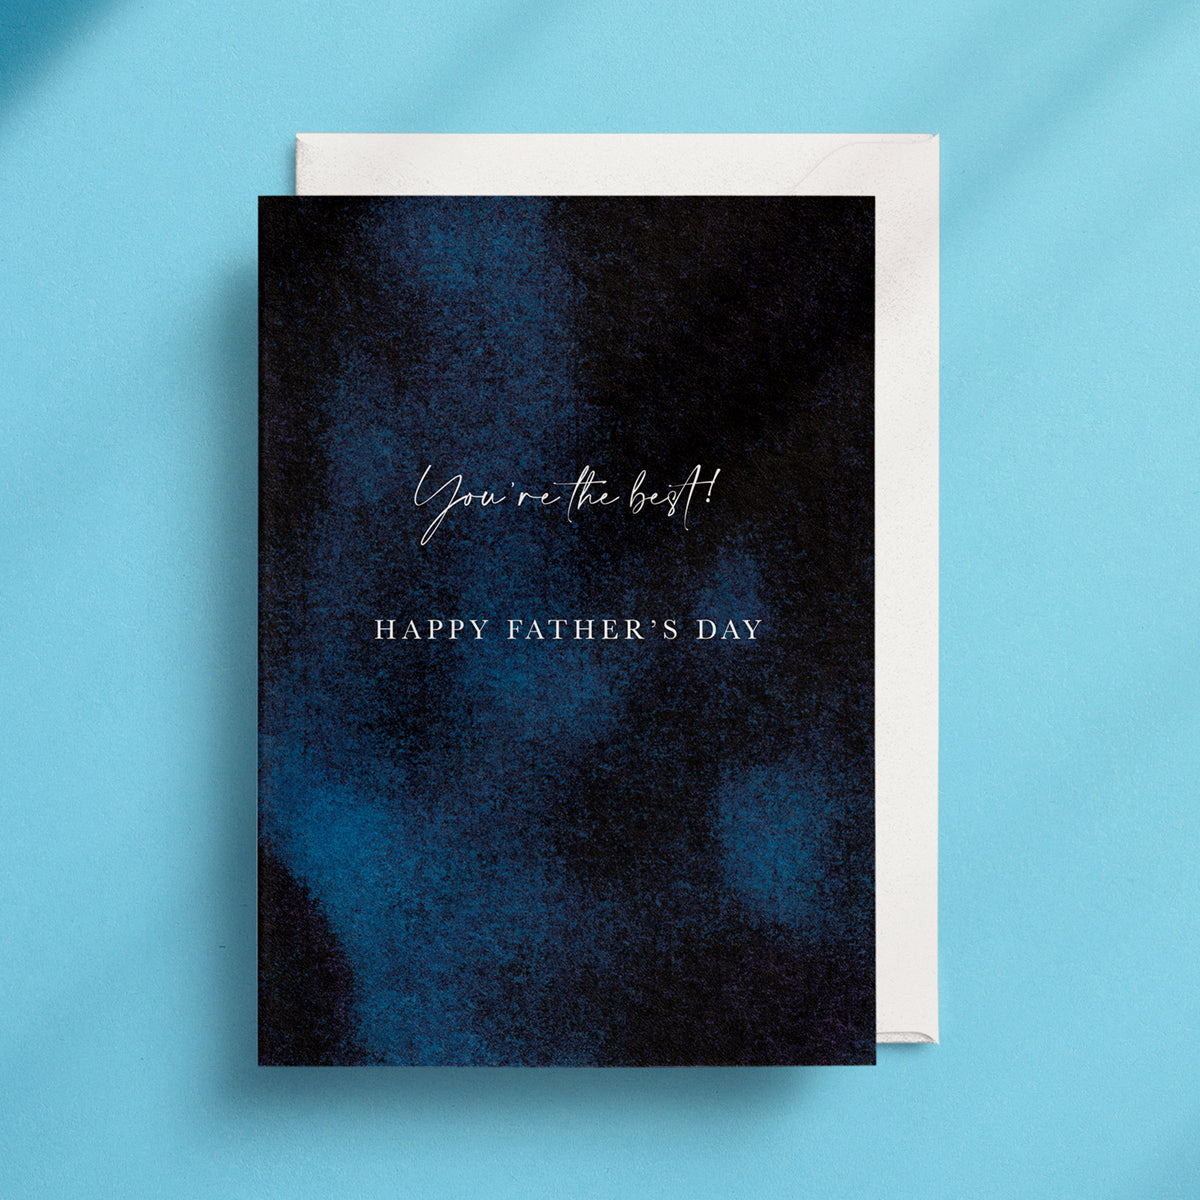 You're The Best! Happy Father's Day - Greeting Card